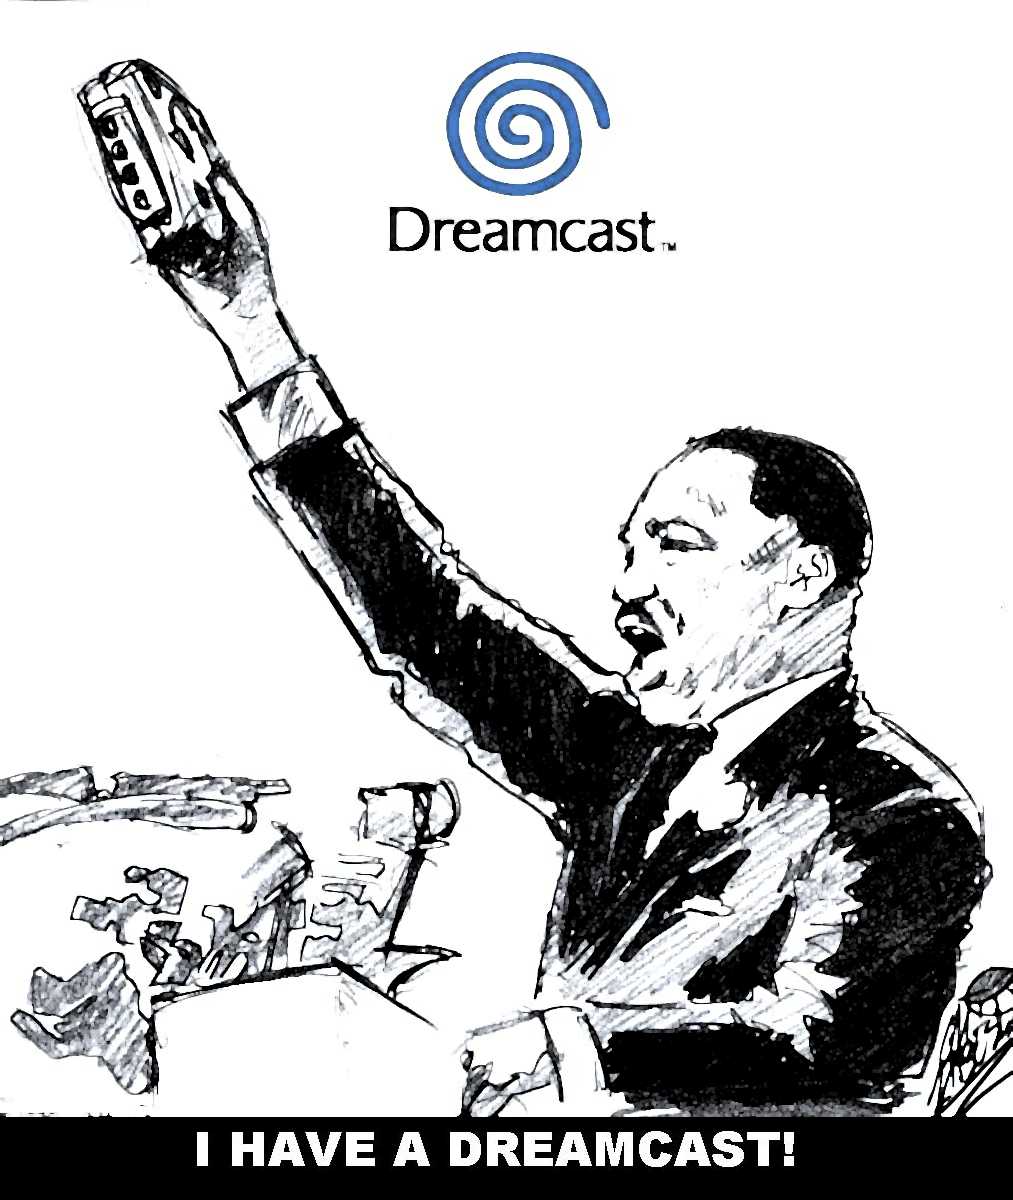 I have a dreamcast